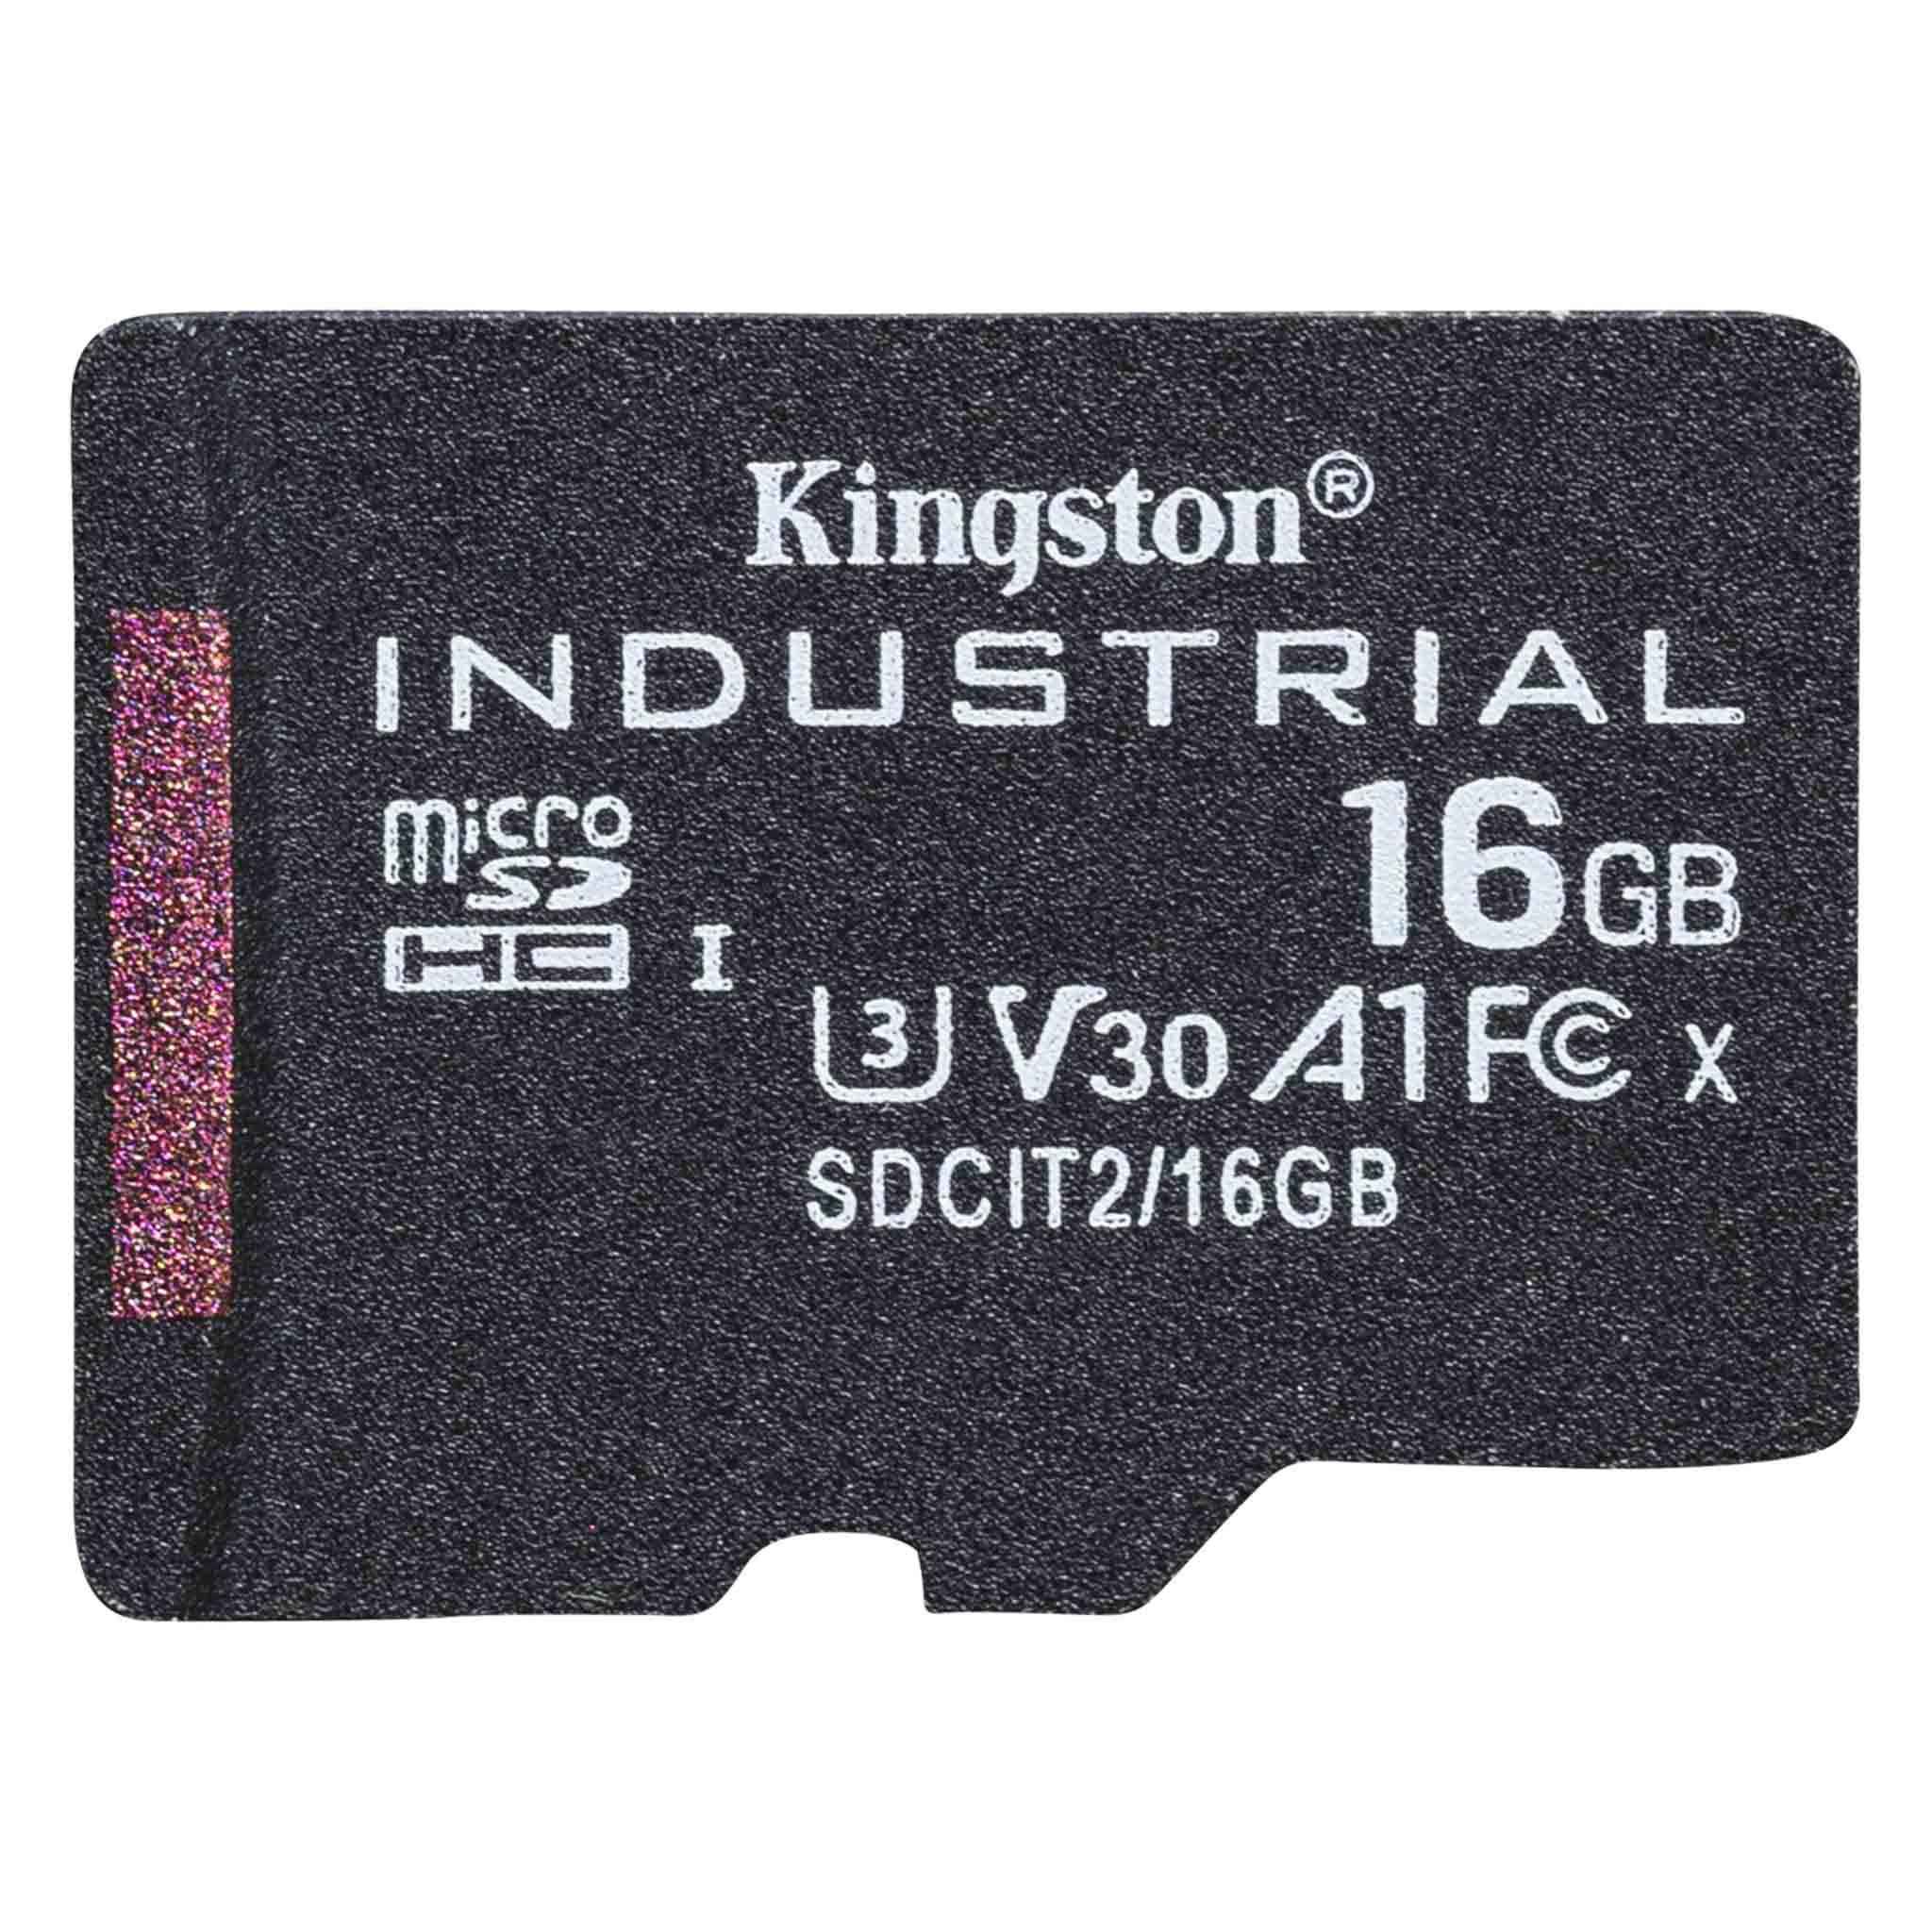 Kingston Industrial Grade 32GB Asus M1 MicroSDHC Card Verified by SanFlash. 90MBs Works for Kingston 